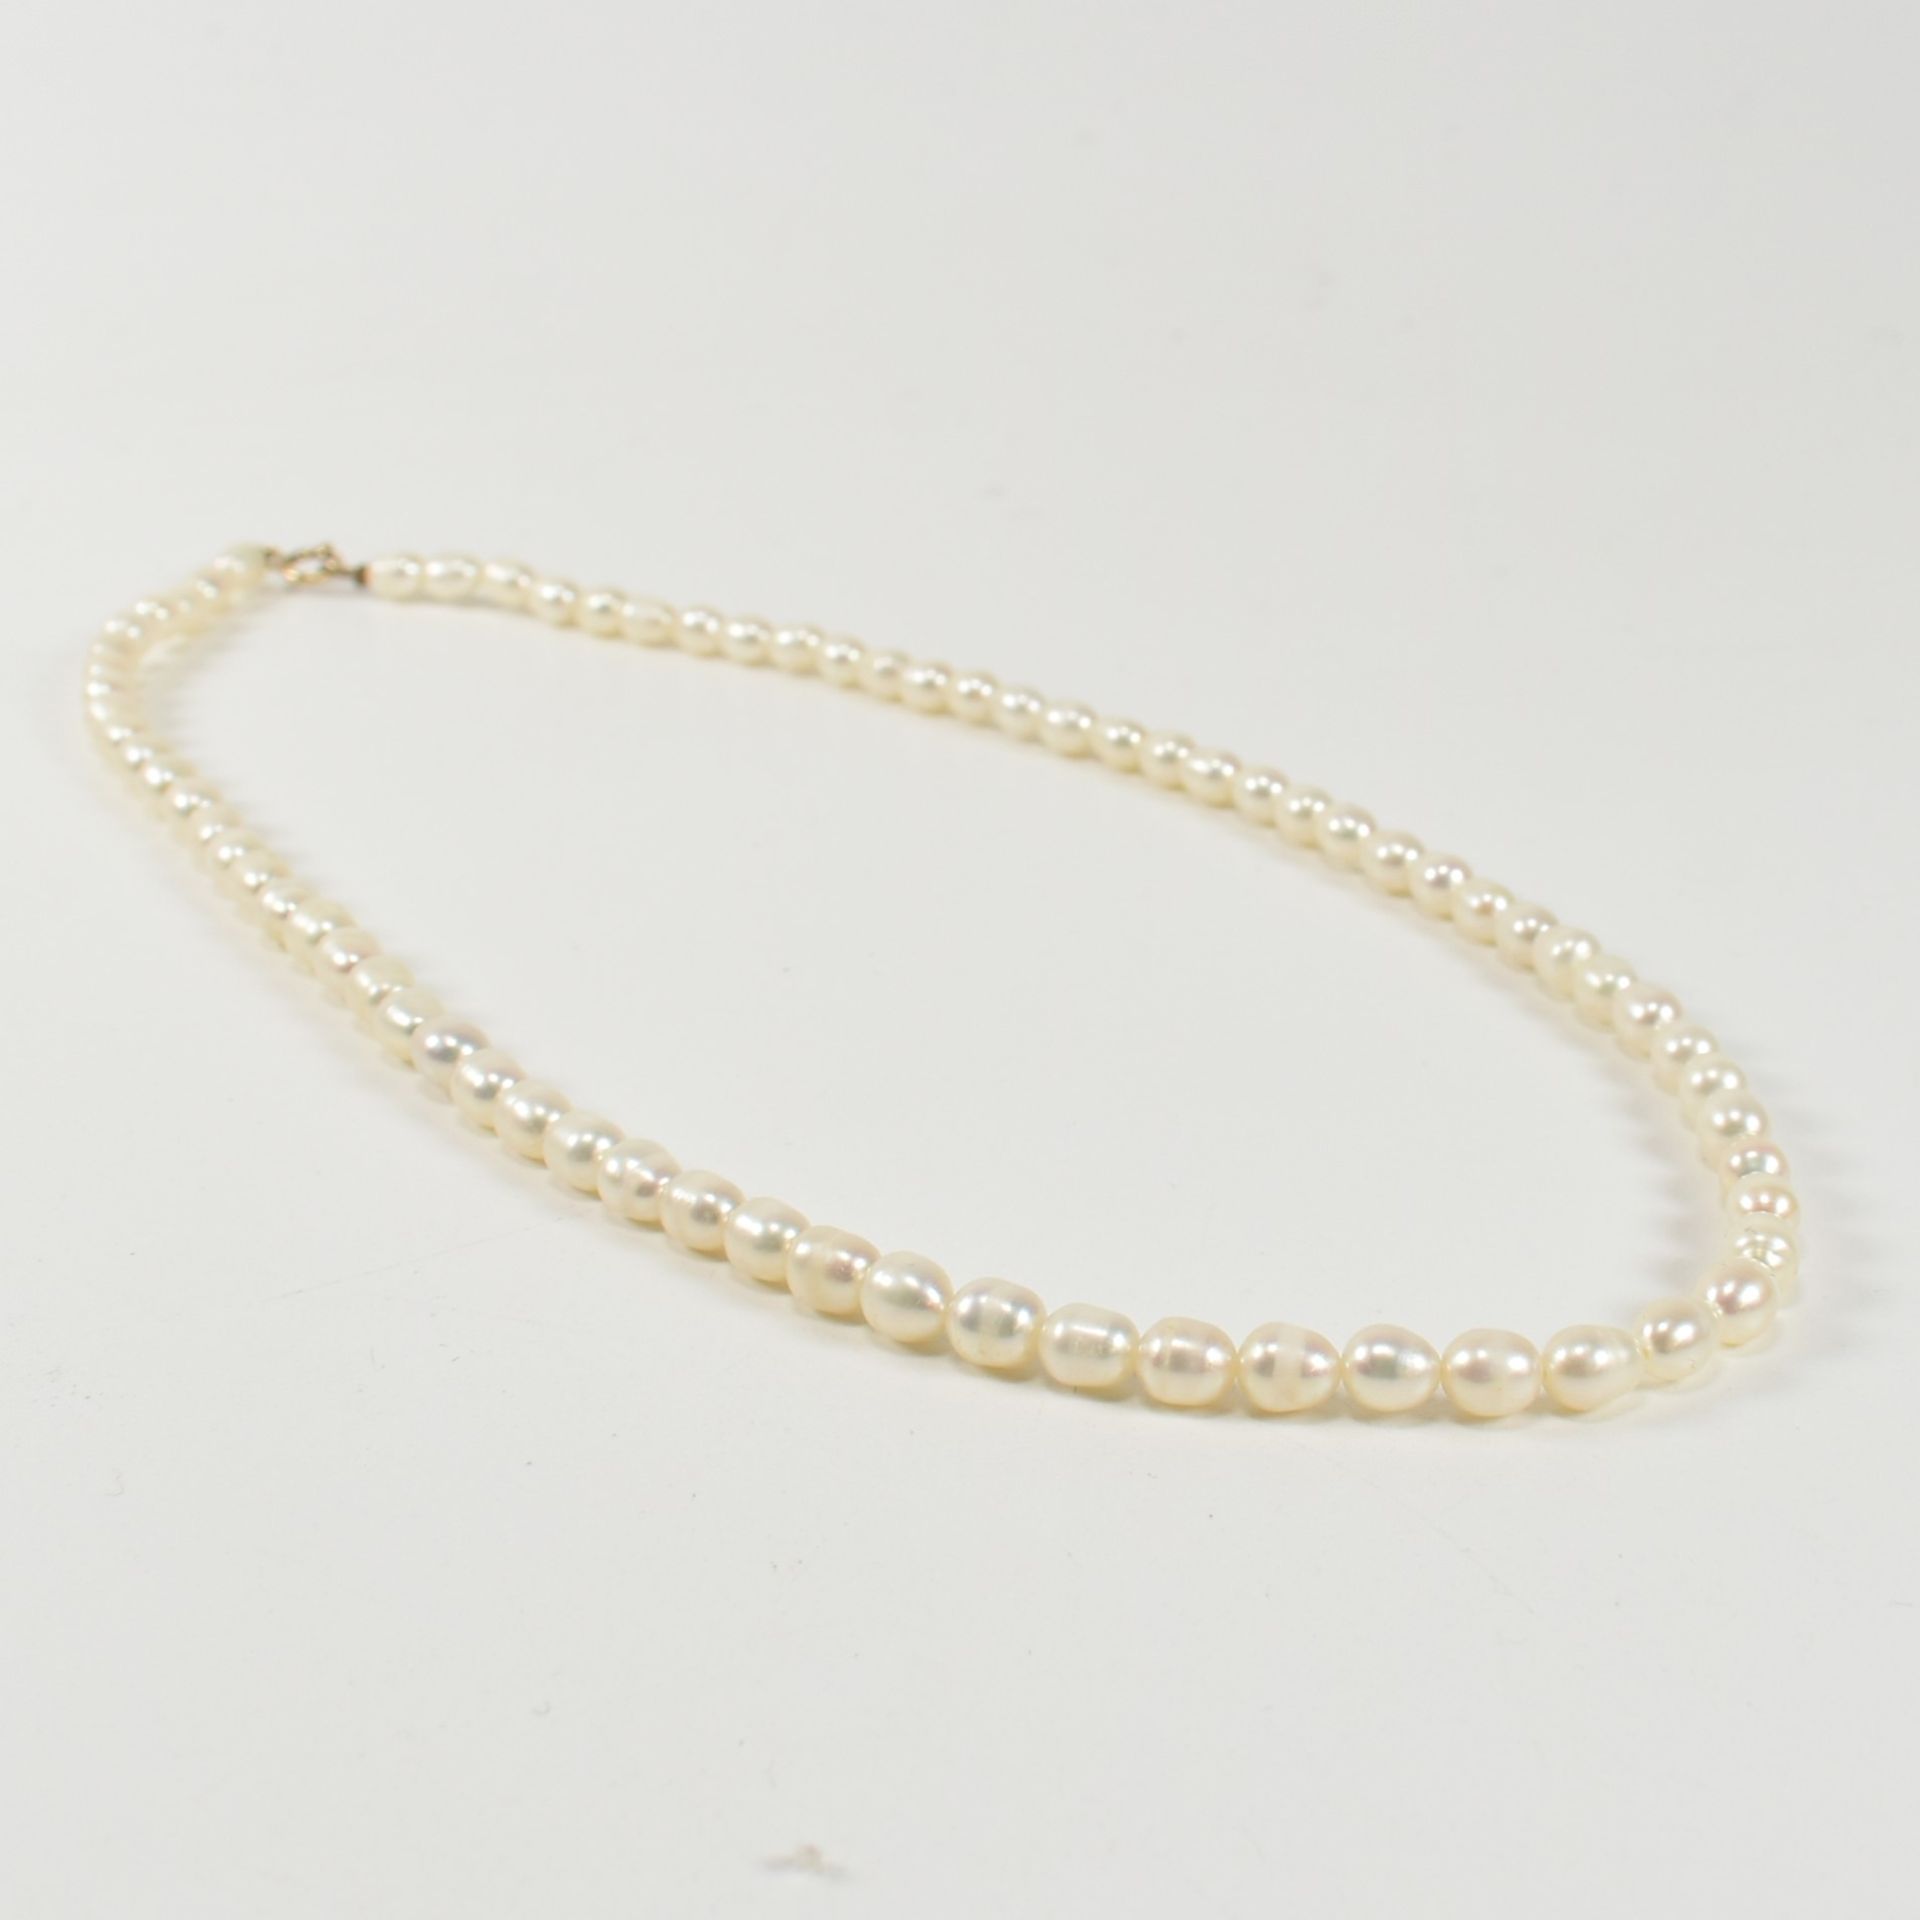 9CT GOLD & CULTURED PEARL NECKLACE - Image 2 of 4